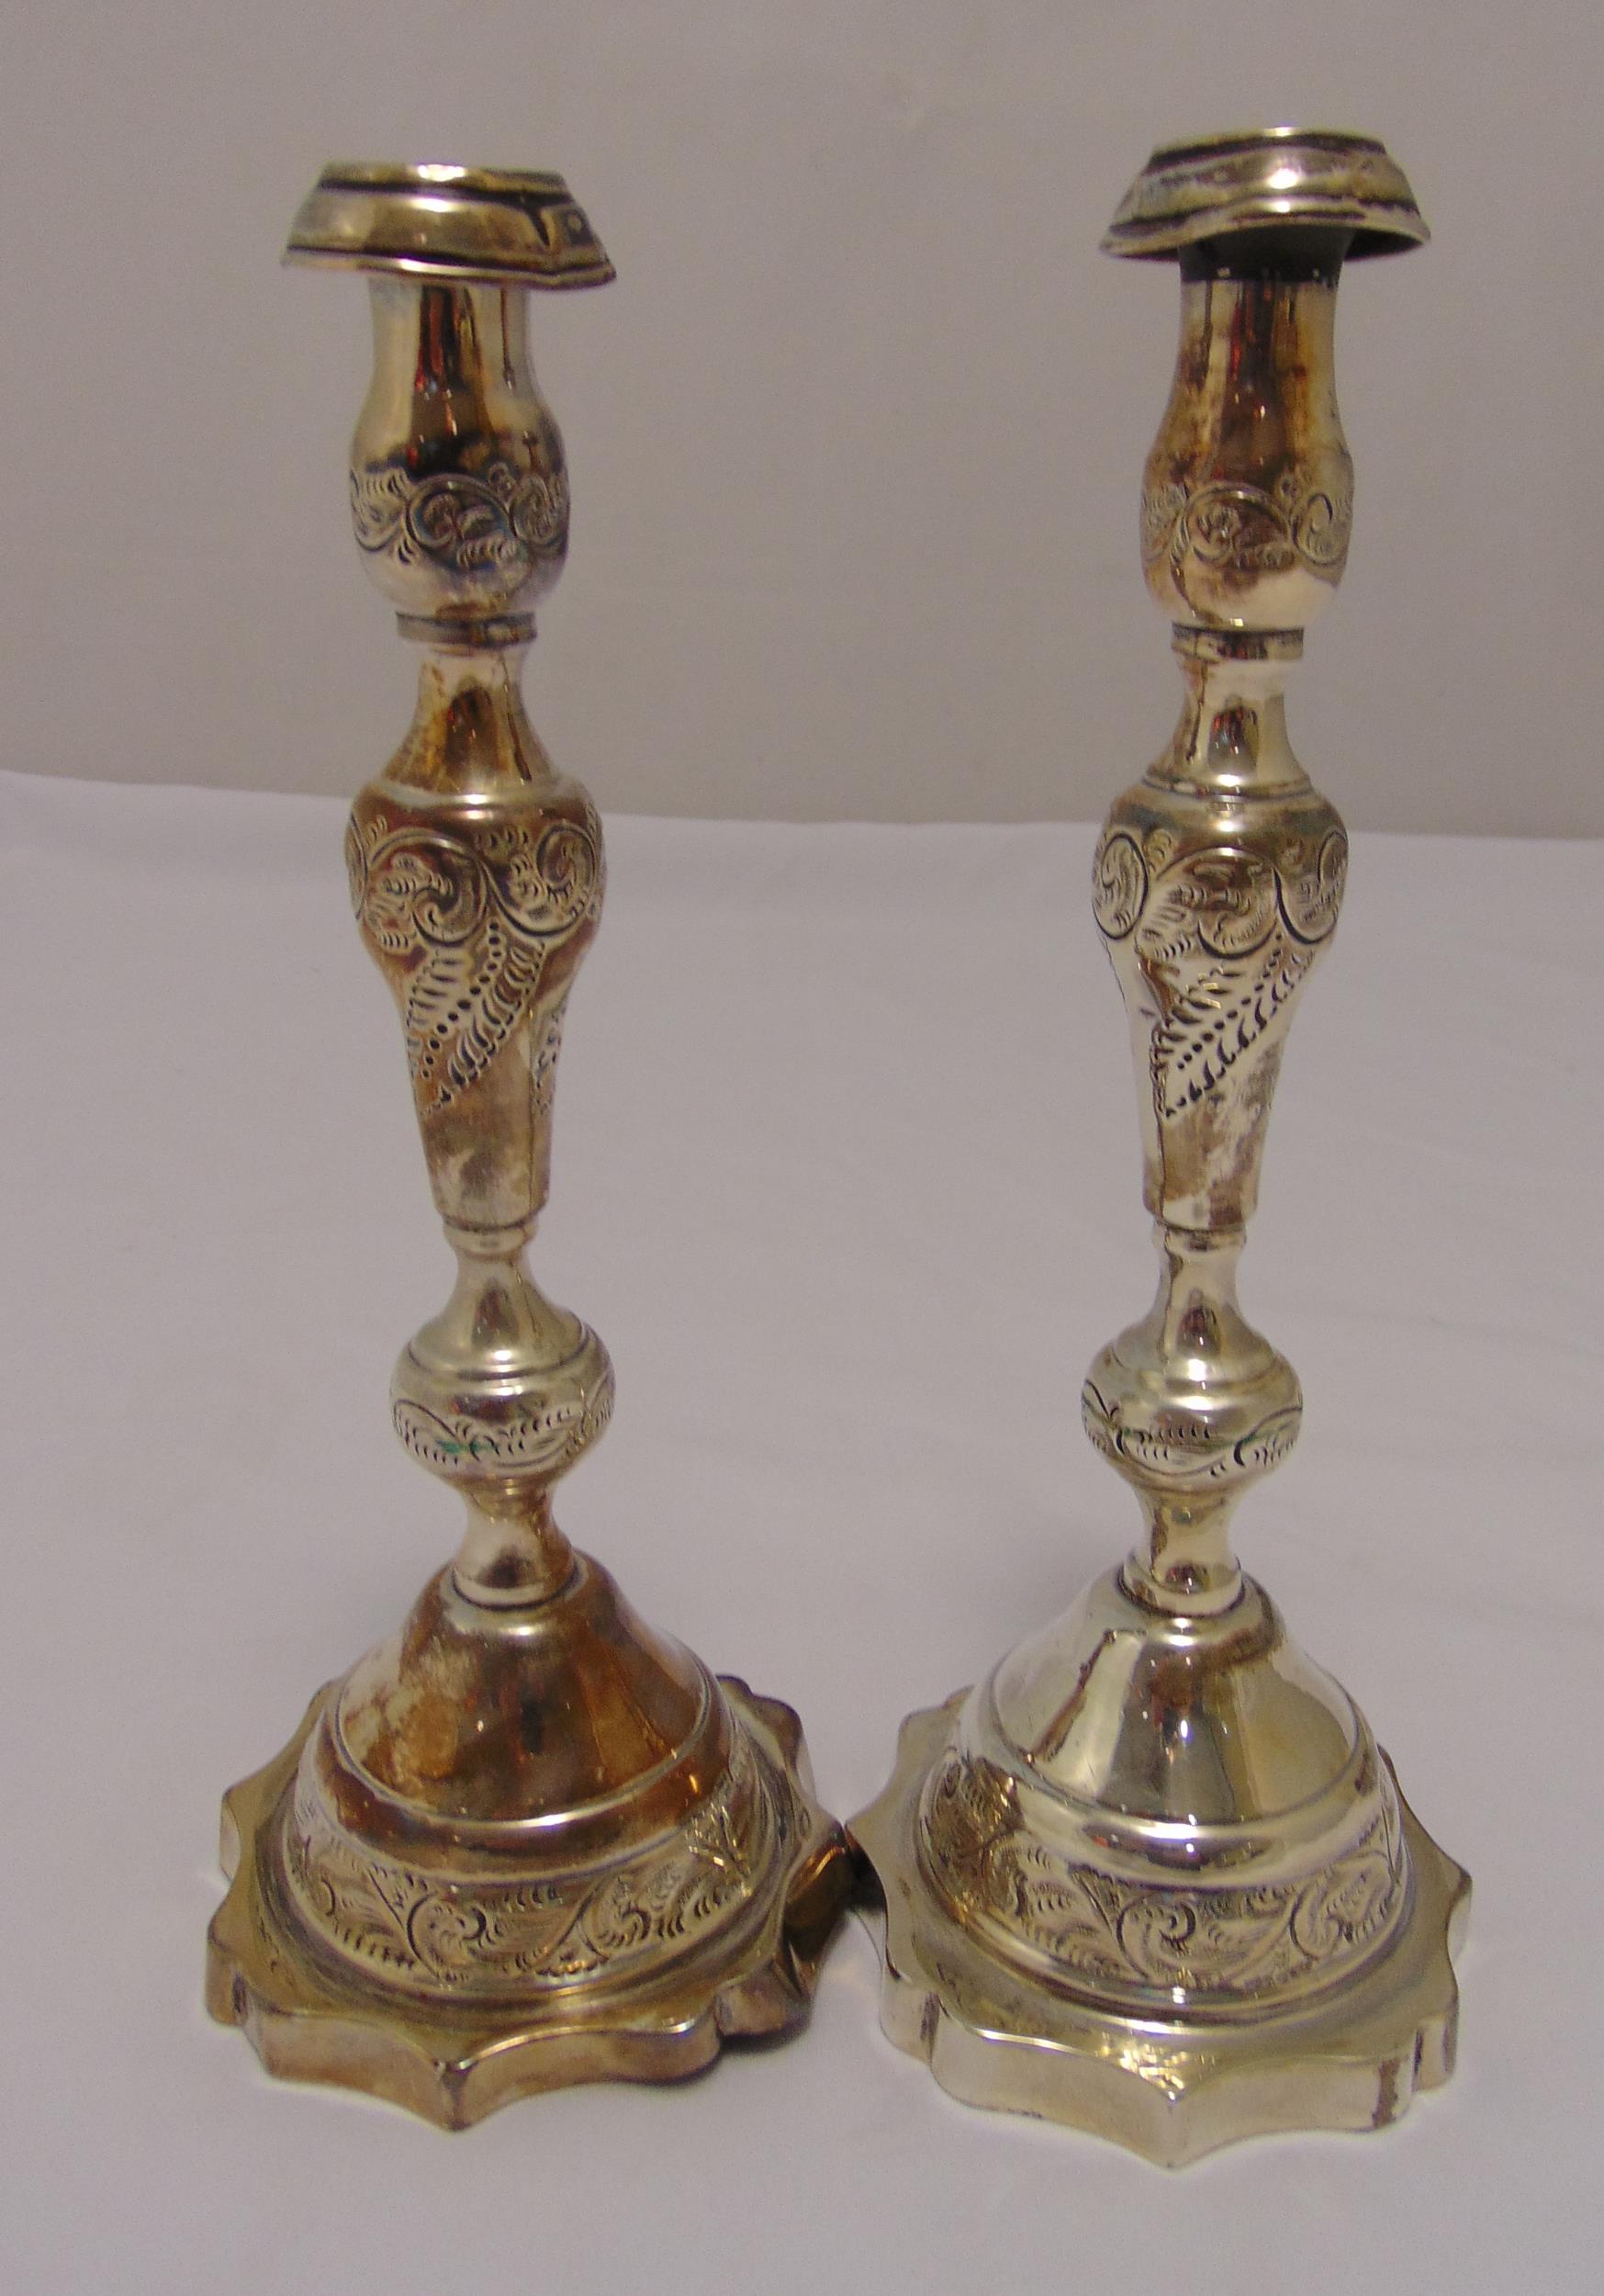 A pair of hallmarked silver table candlesticks, knopped baluster form engraved with leaves and